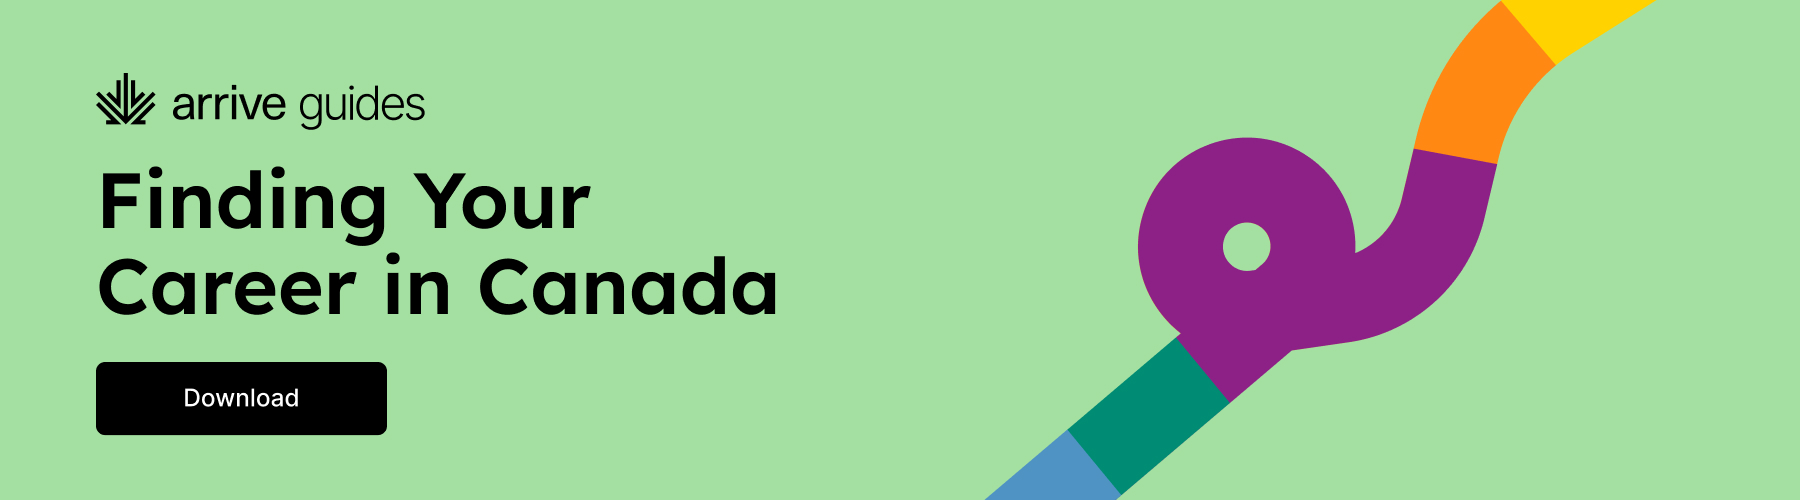 Finding your career in Canada guide banner